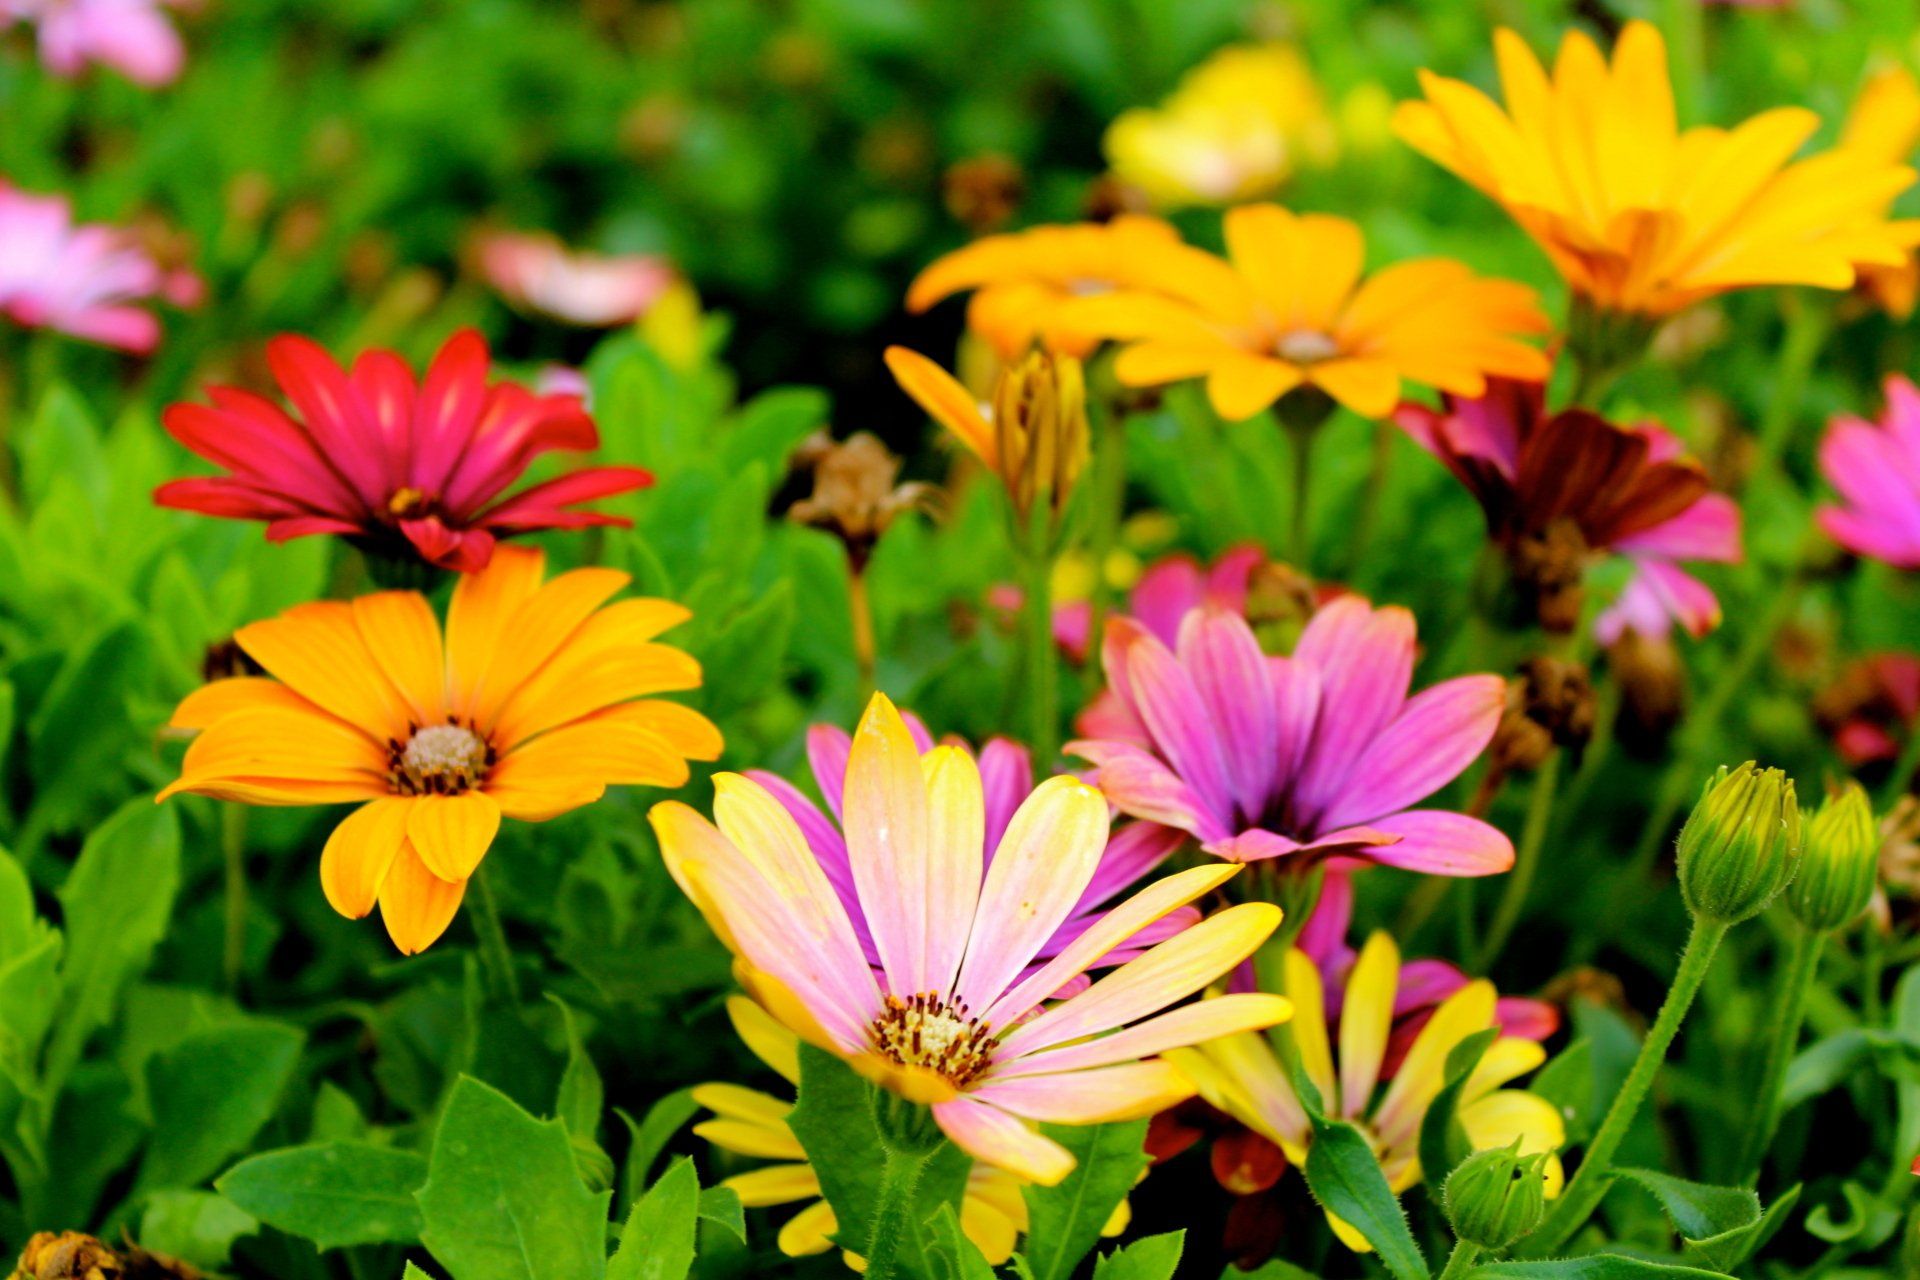 Colorful flowers in a flowerbed